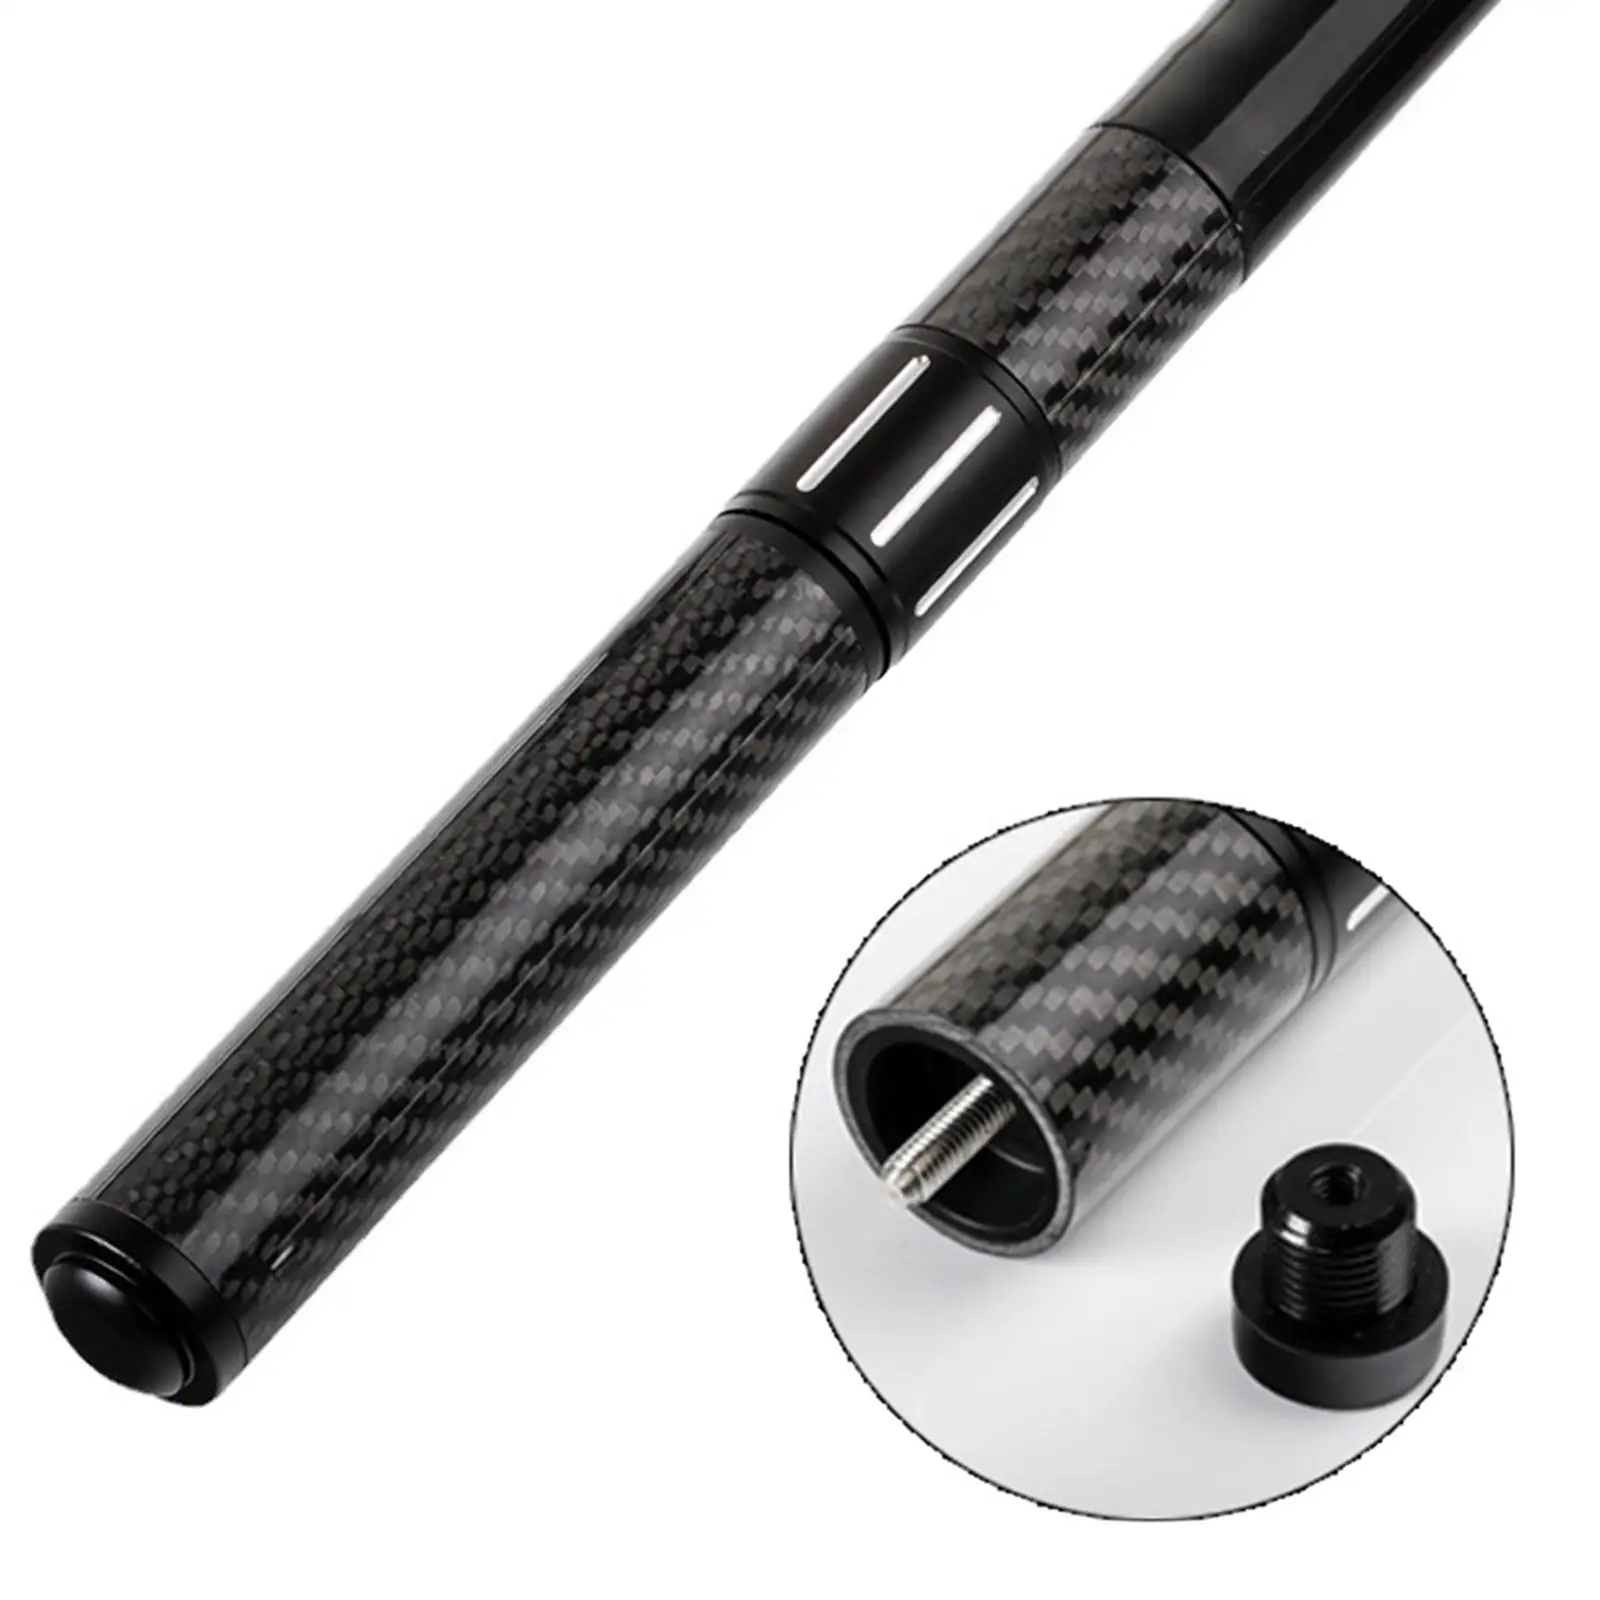 Professional Billiards Pool Cue Extension with Adjustable Length